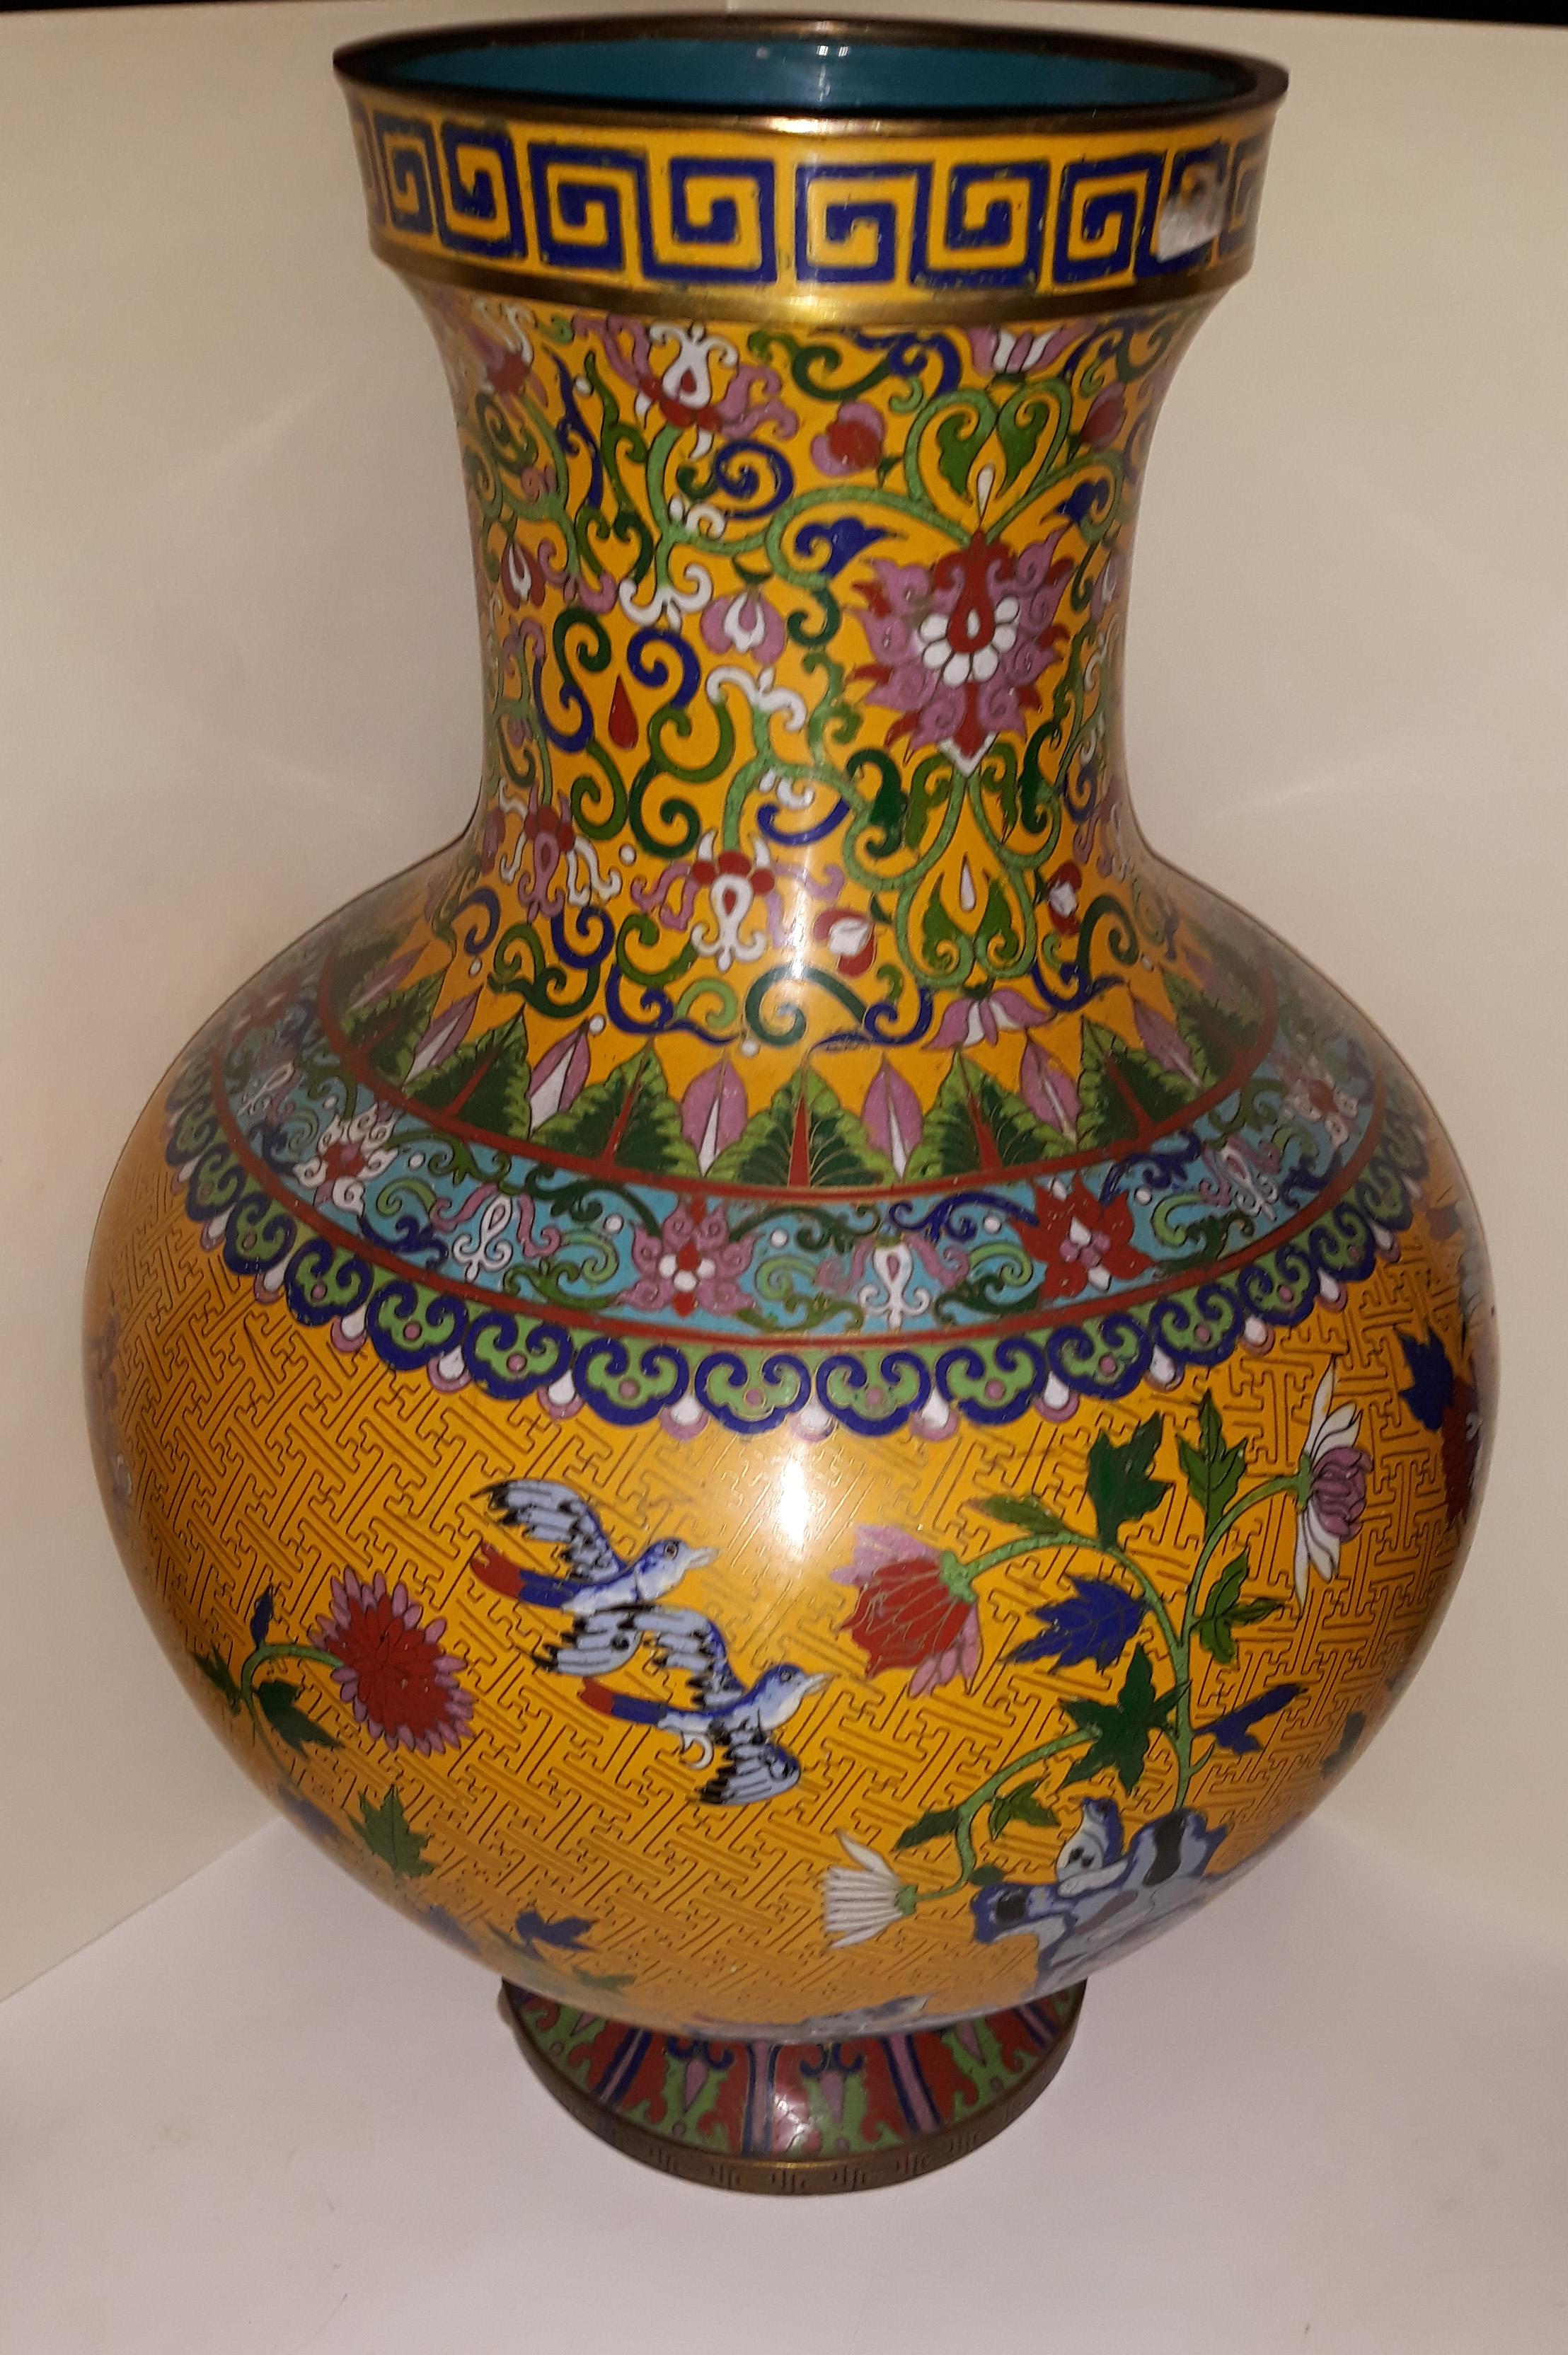 20th century Cloisonne impressive large vase, China 1910, copper wire and hard stones.
Artistic floral decoration with birds, with edges with a Greek pattern and intense workmanship. Decoration also on the bottom.
Dimensions: Height cm 52,